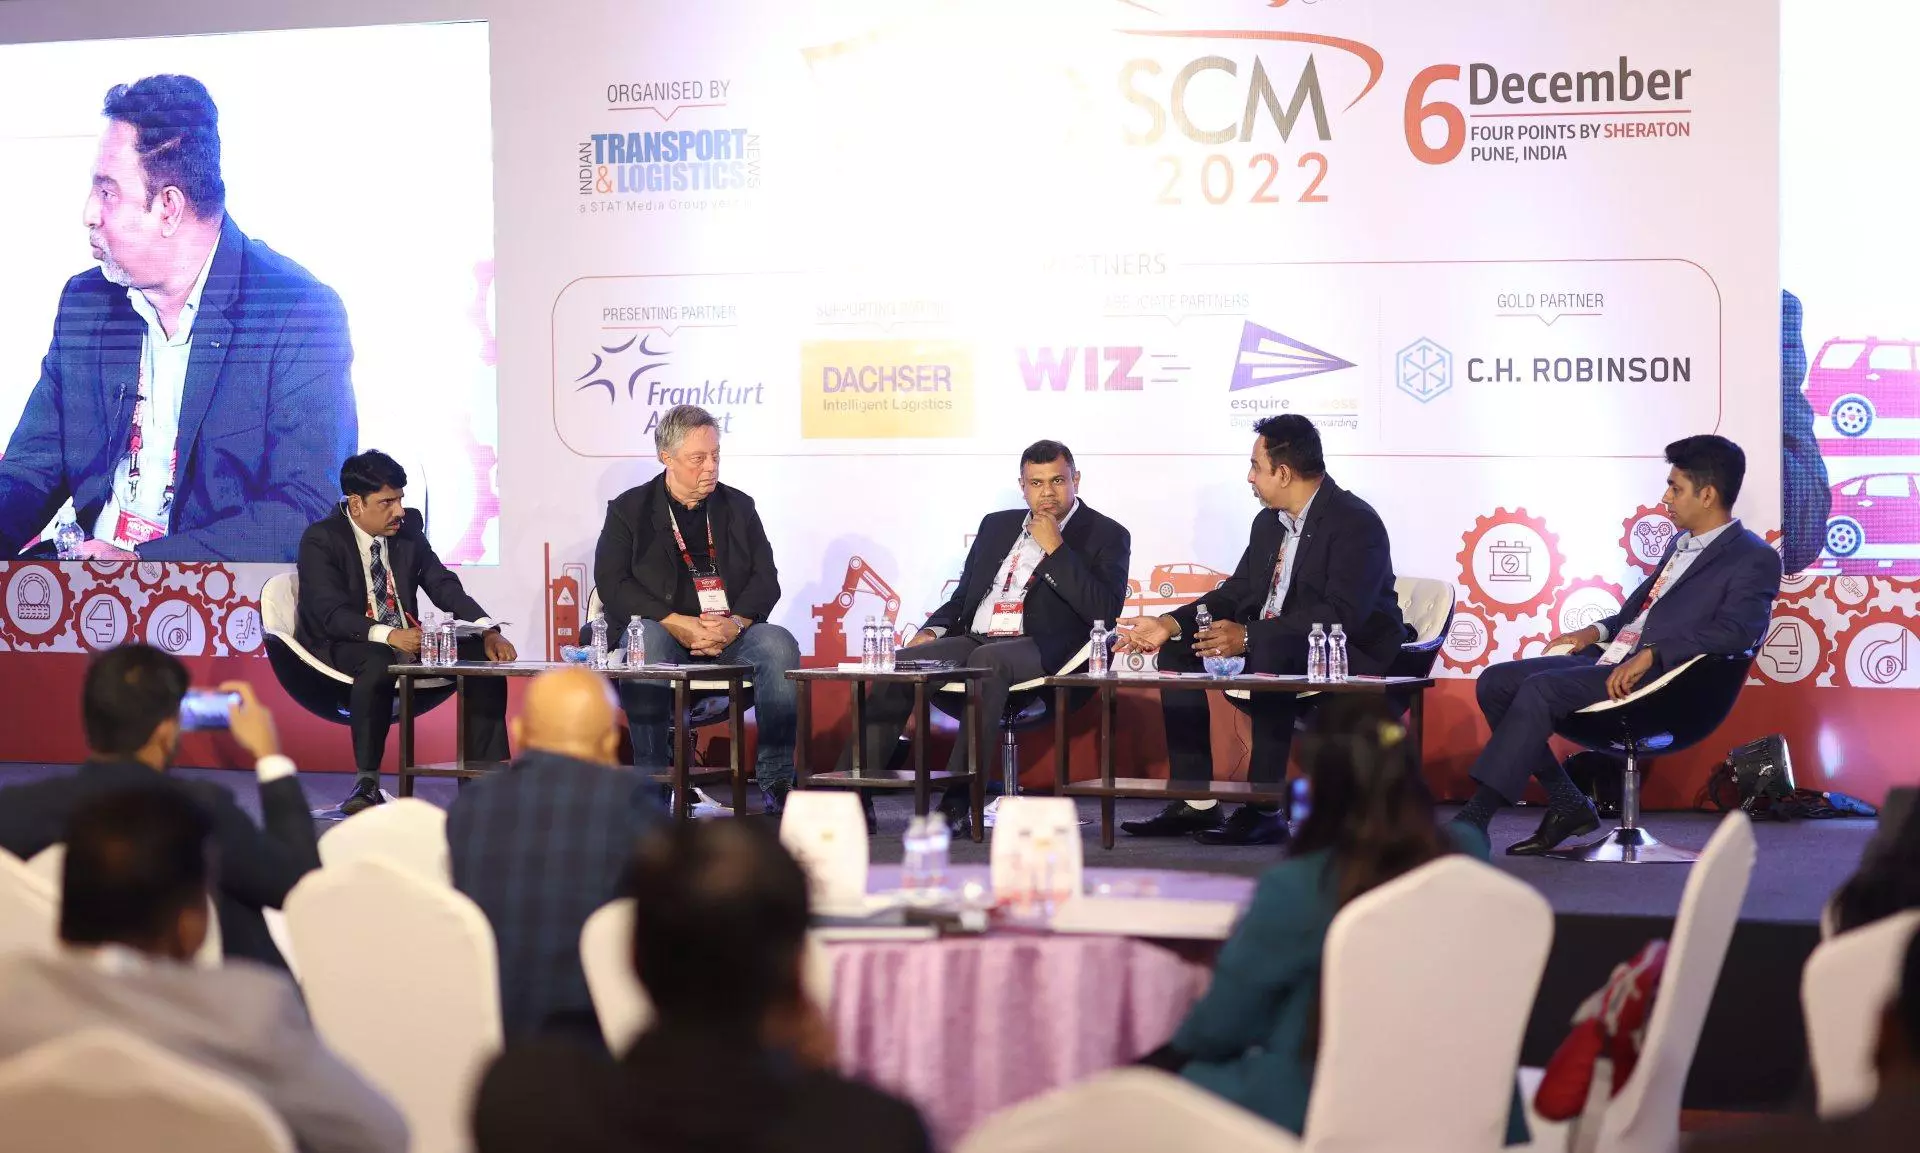 AutoSCM Summit 2022 concludes in Pune as industry prepares for uncertain 2023